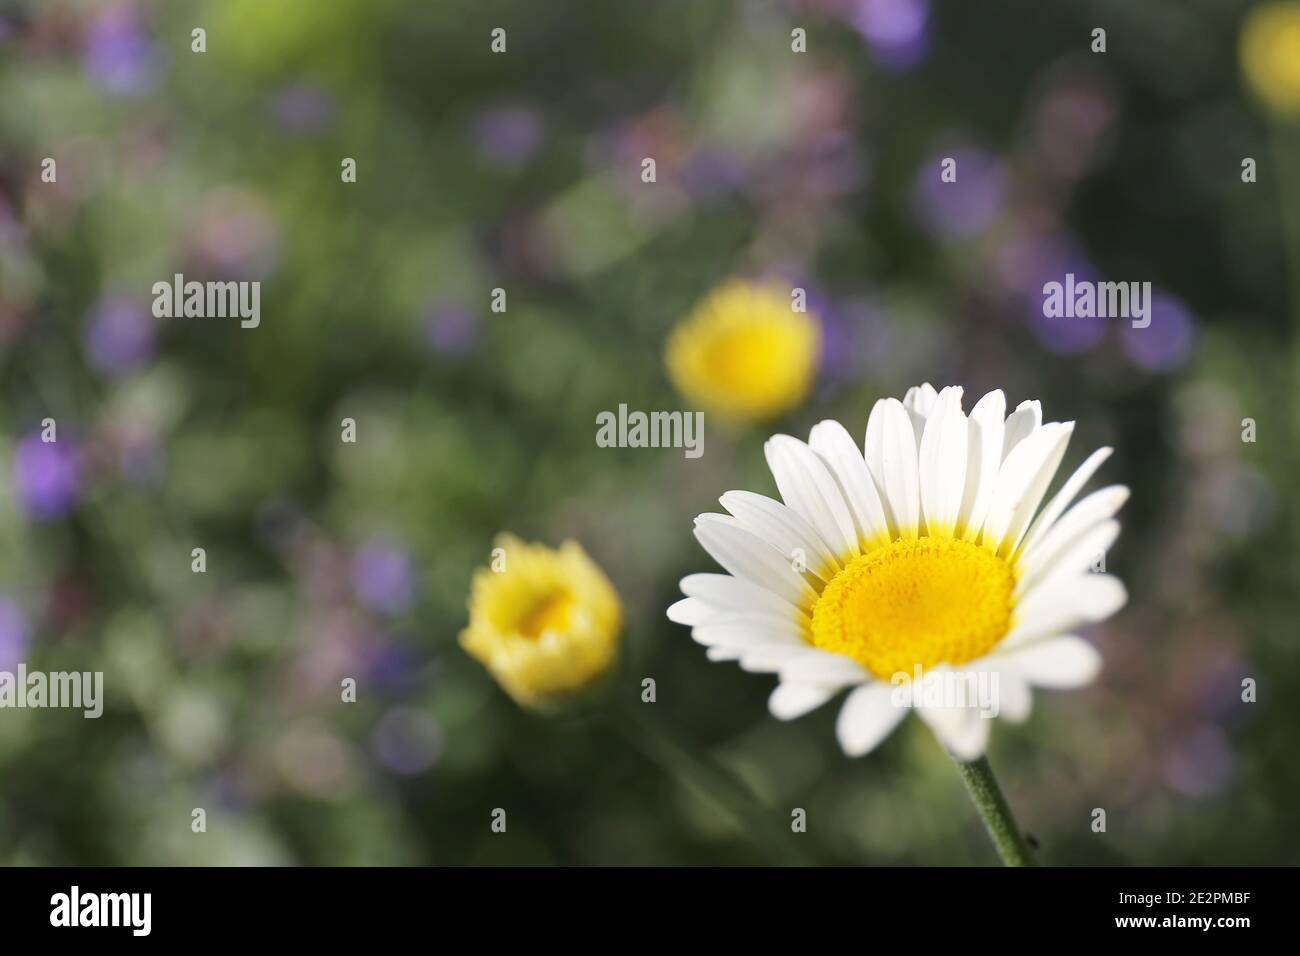 A Closeup on a Comet White Marguerite Daisy, Argyranthemum, with Purple Catmint Flowers in the Garden in the background. Stock Photo